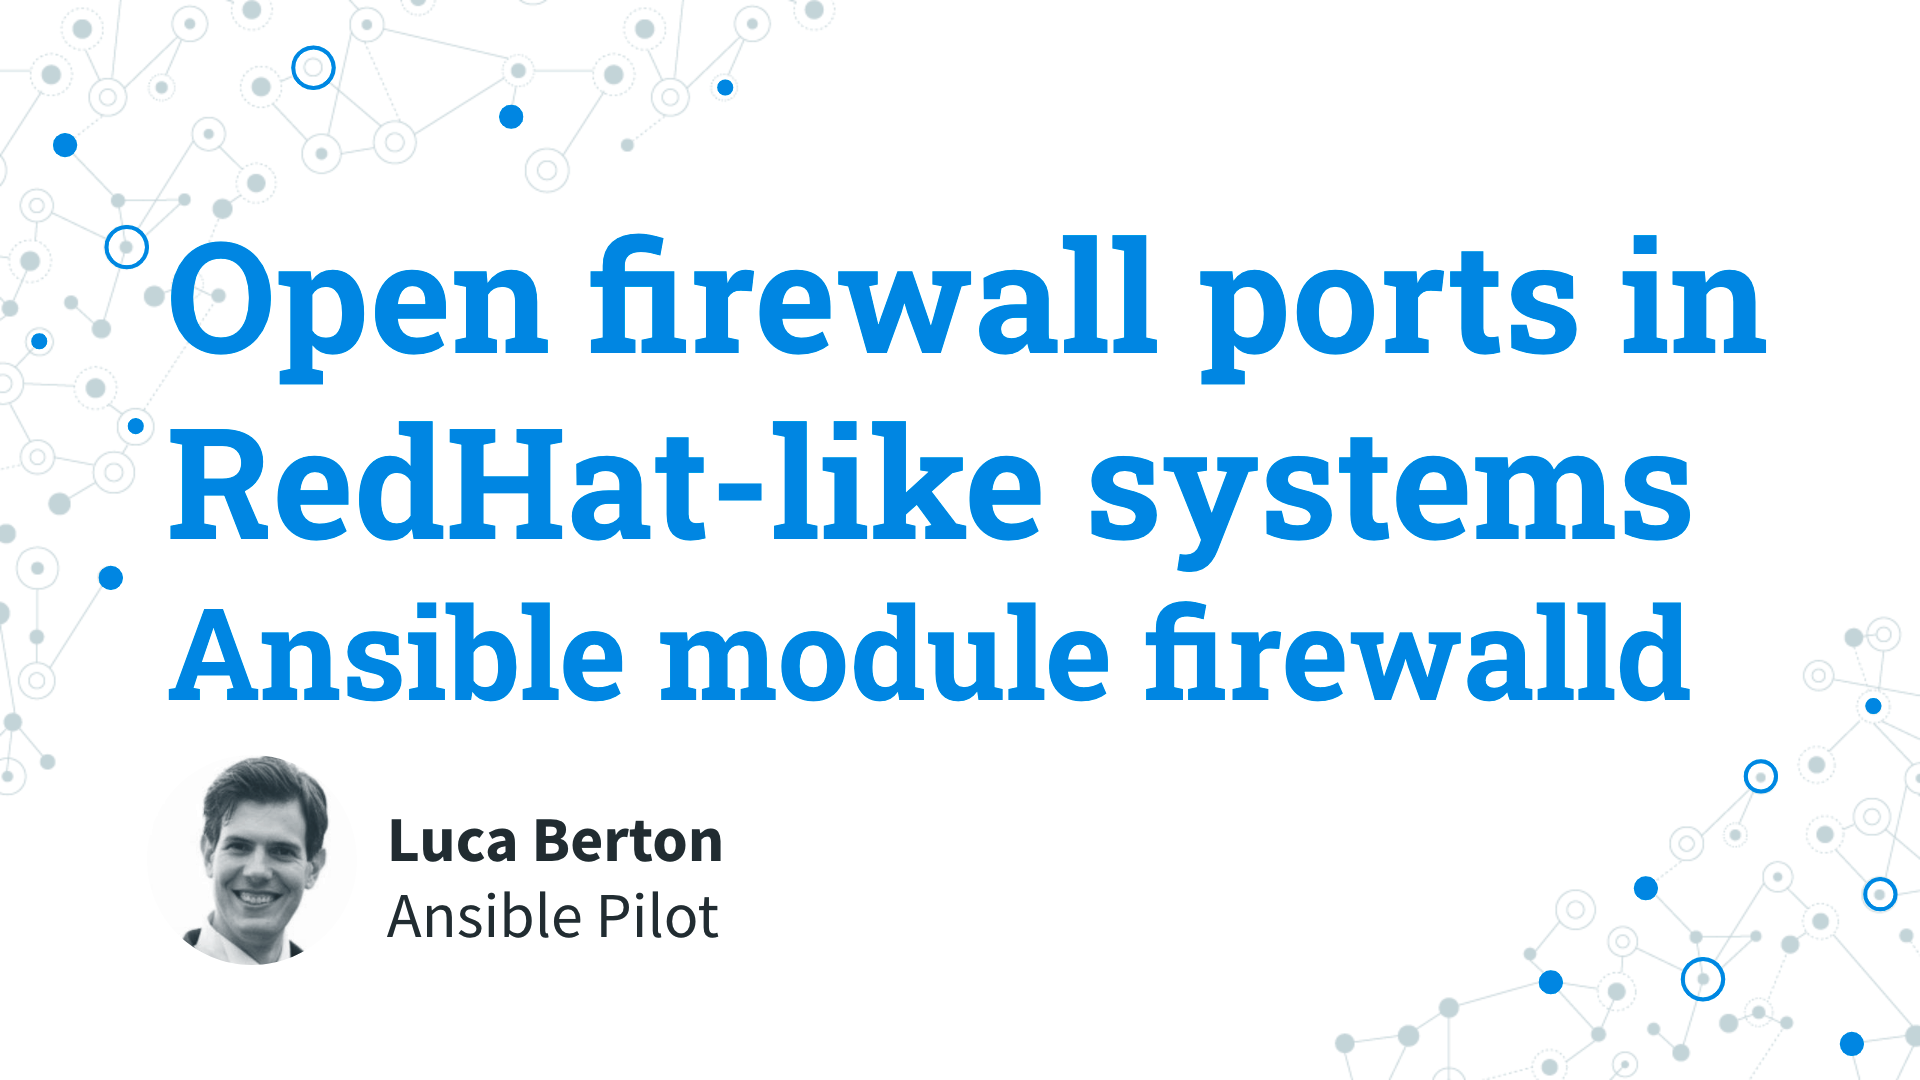 Open firewall ports in RedHat-like systems - Ansible module firewalld